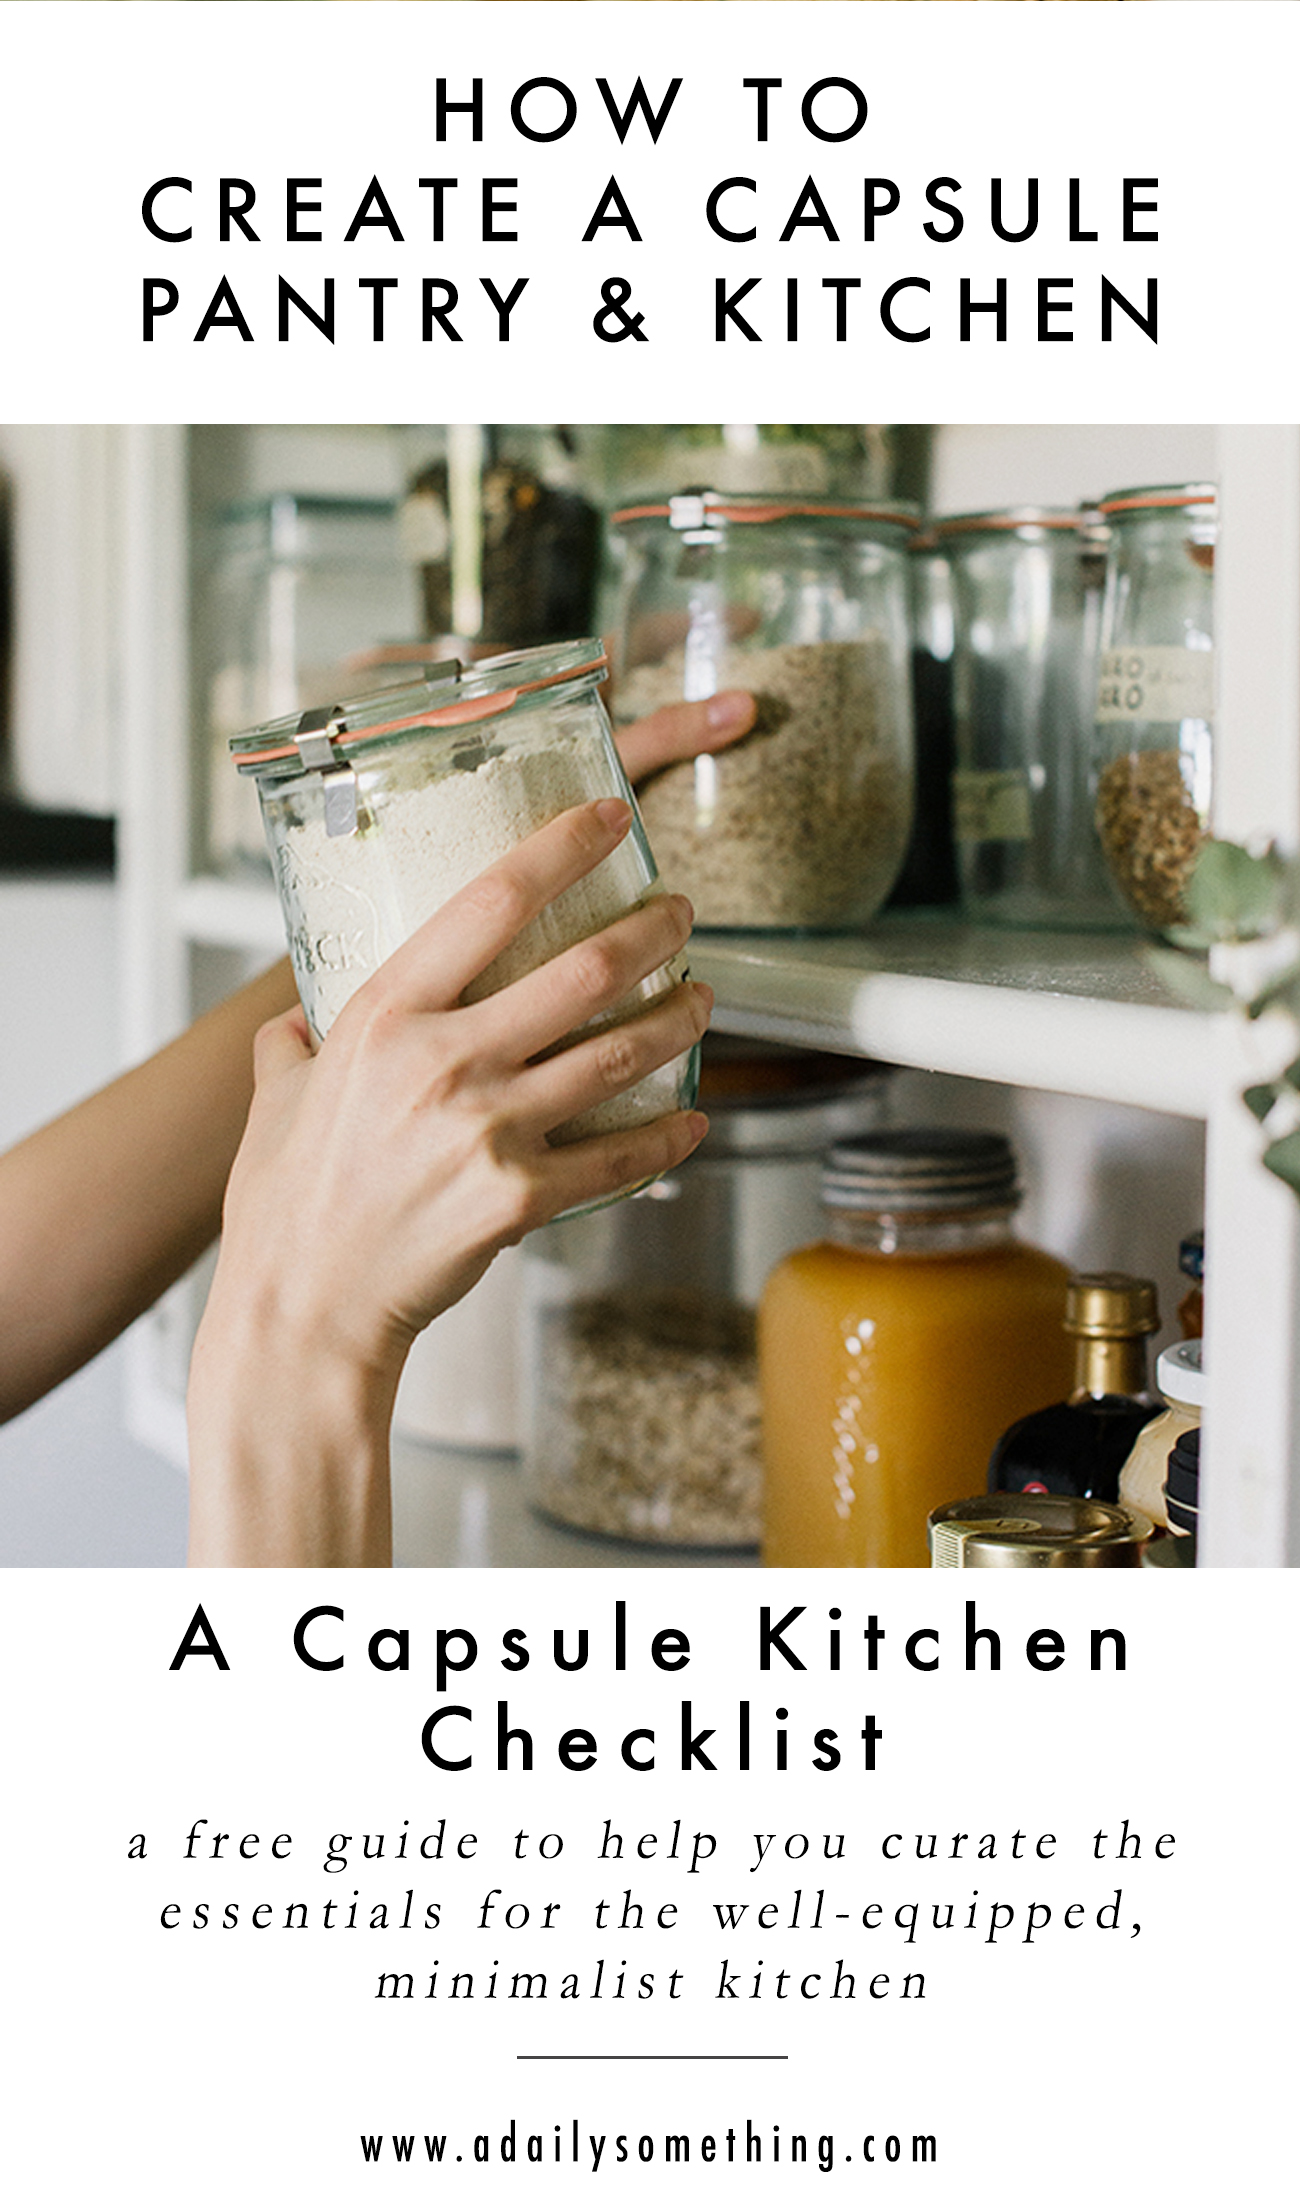 https://www.adailysomething.com/wp-content/uploads/2018/03/A-Capsule-Kitchen-PIN6.jpg